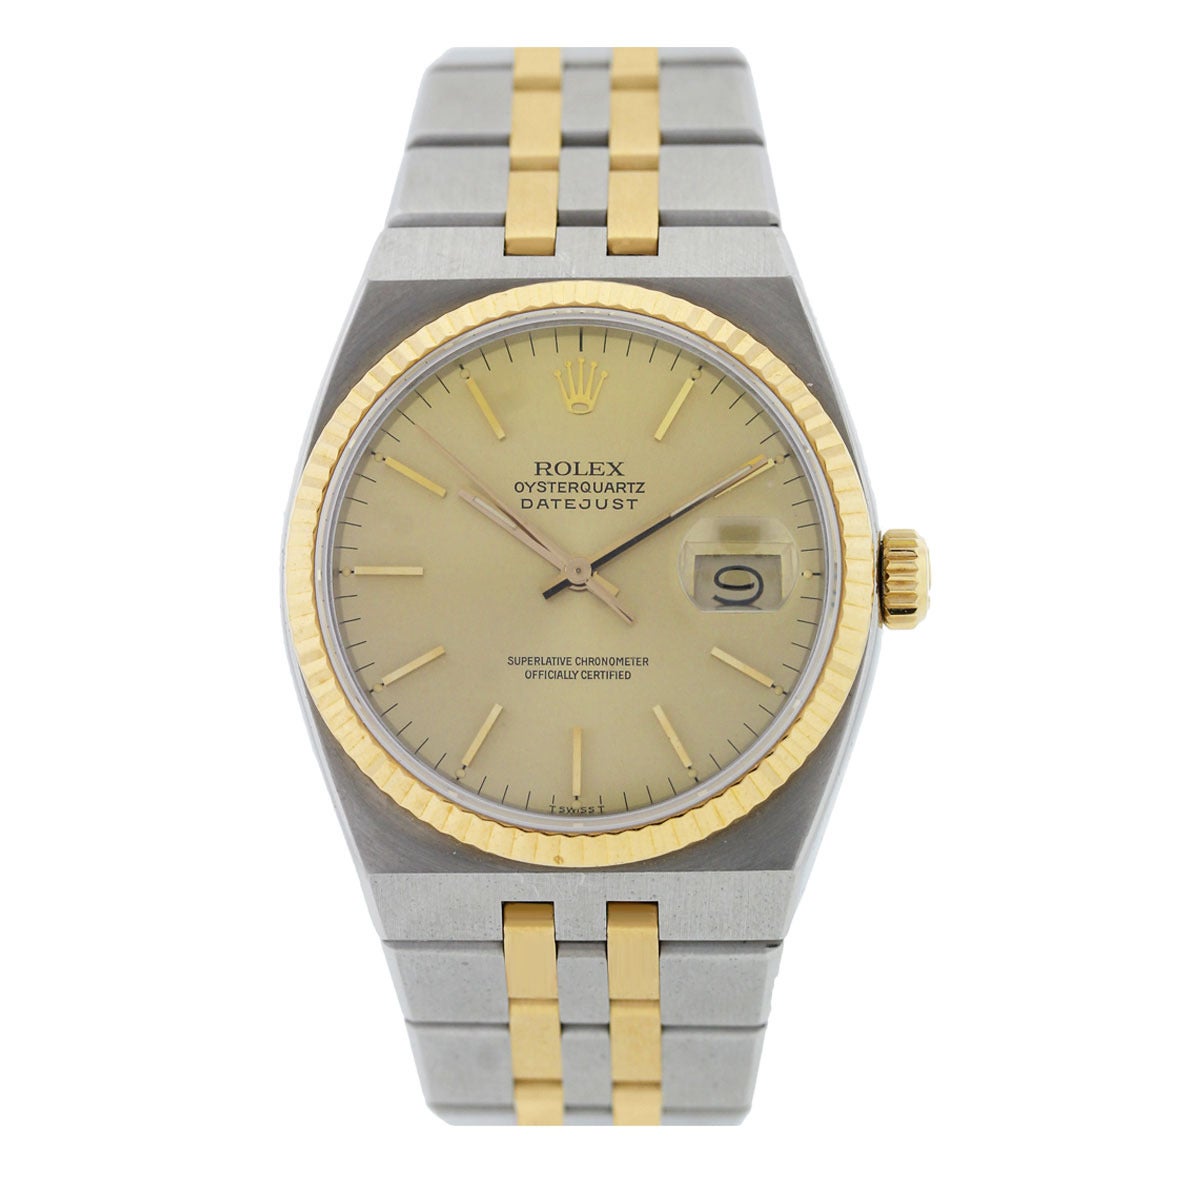 Brand: Rolex
Model: Datejust
Reference: 17013
Case Material: Yellow Gold and Stainless Steel
Movement: Oyster Quartz
Case Measurement: 36mm
Dial: Champagne Dial with Gold Stick Dial Markers, Date at 3 o'clock 
Crystal: Scratch Resistant